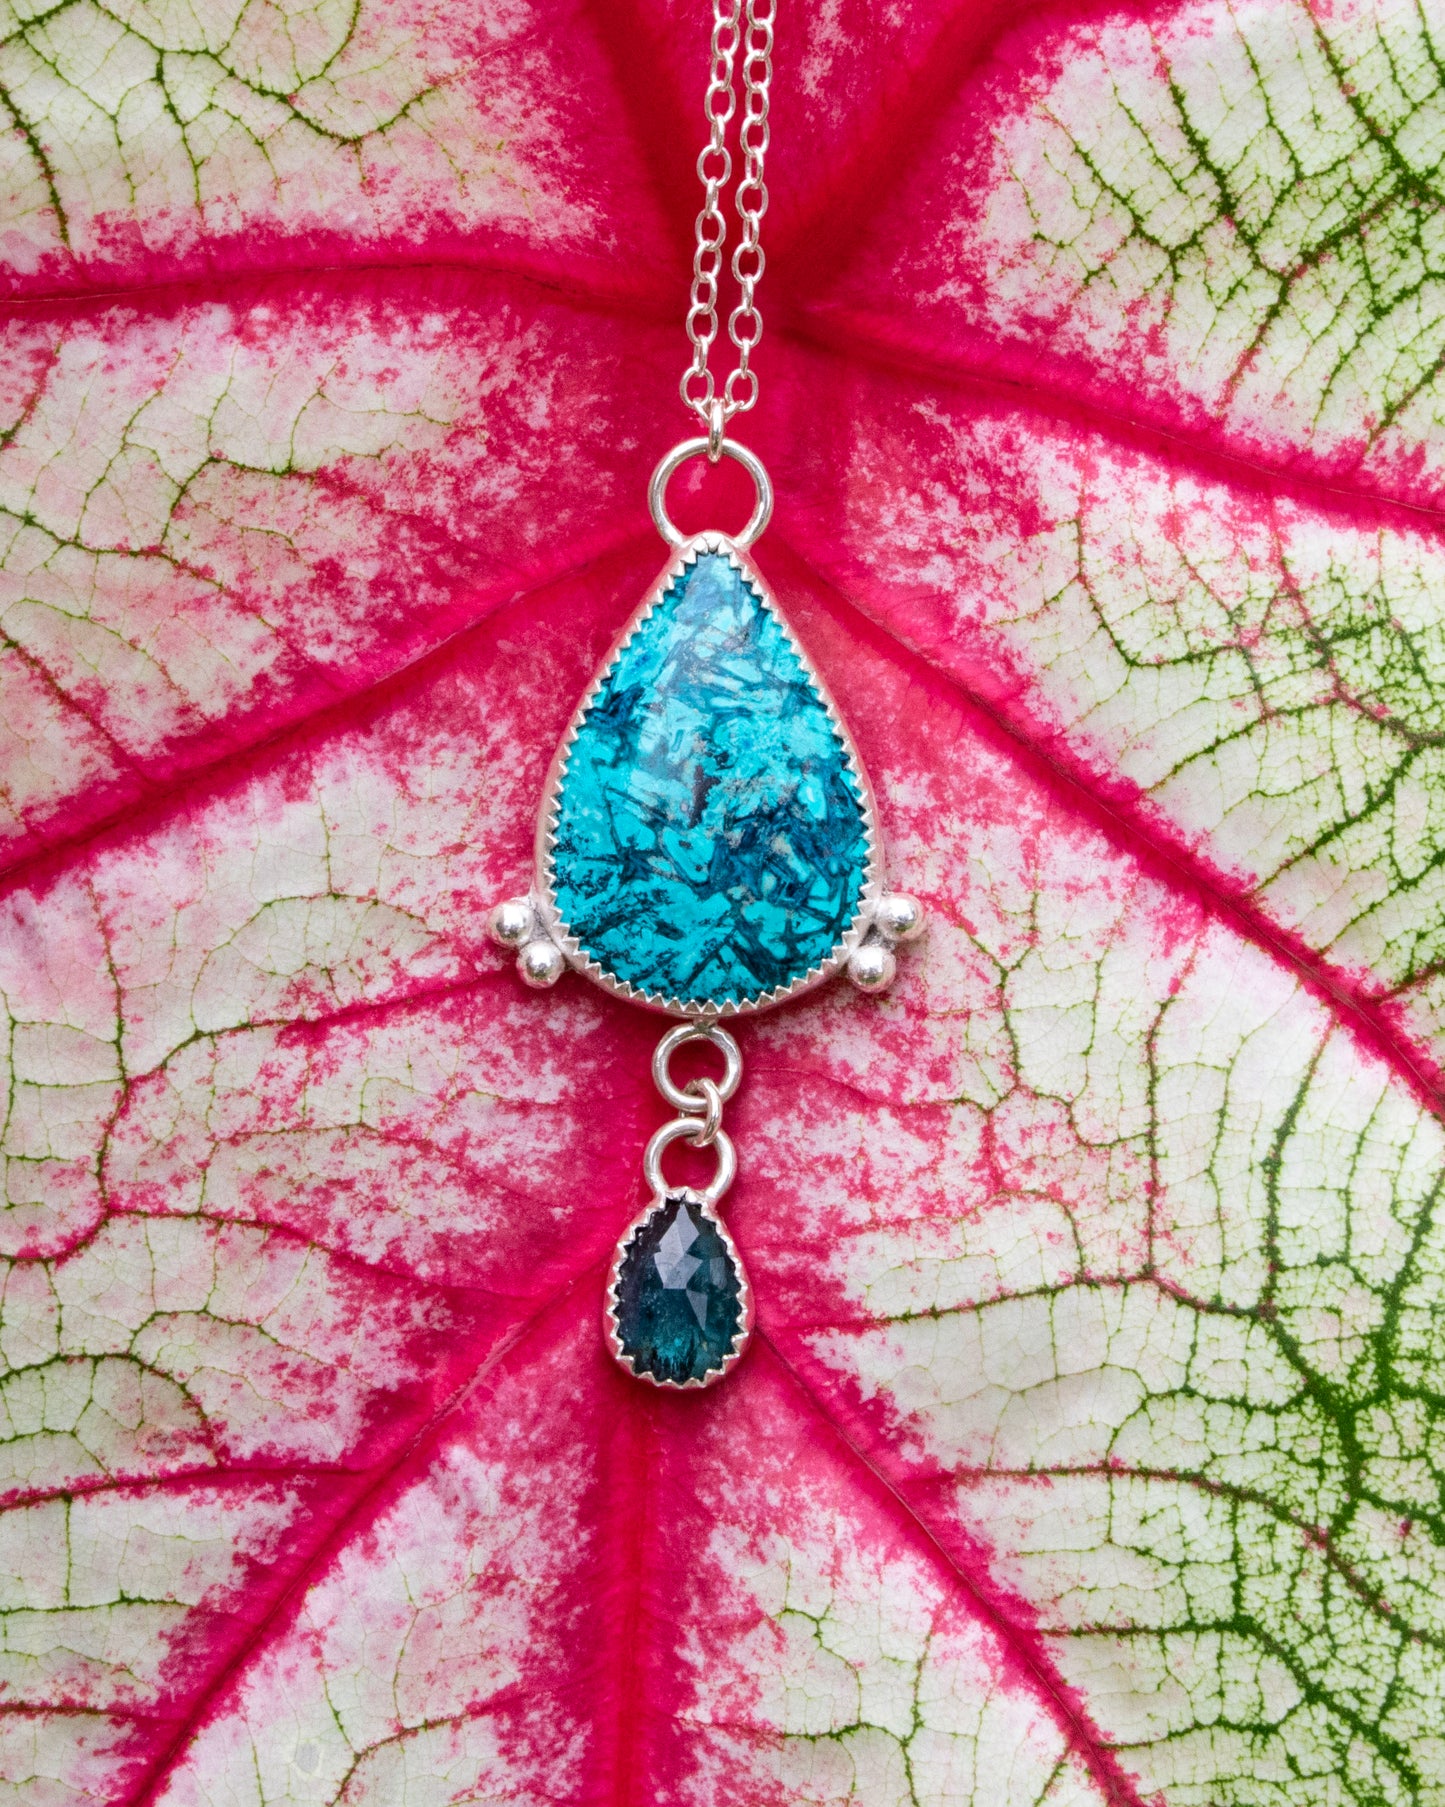 sterling silver necklace with teardrop Chrysocolla with light and dark teal blue striation pattern with two silver beads at the bottom corneres of stone. 3 jumprings connect a small teal moss kyanite hangs from the bottom. Necklace is in front of red veins on white and green leaf 